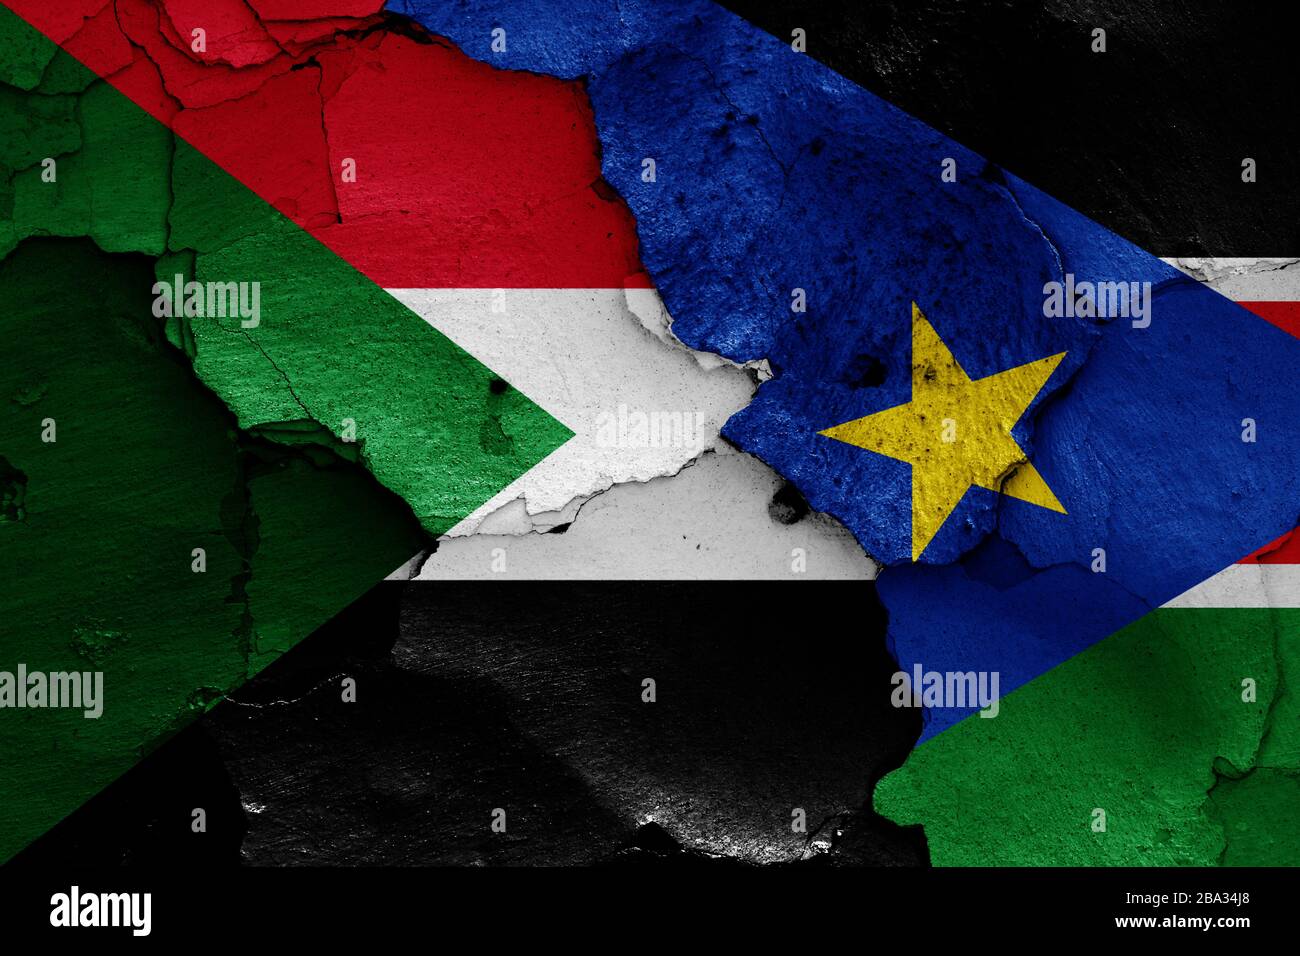 flags of Sudan and South Sudan painted on cracked wall Stock Photo